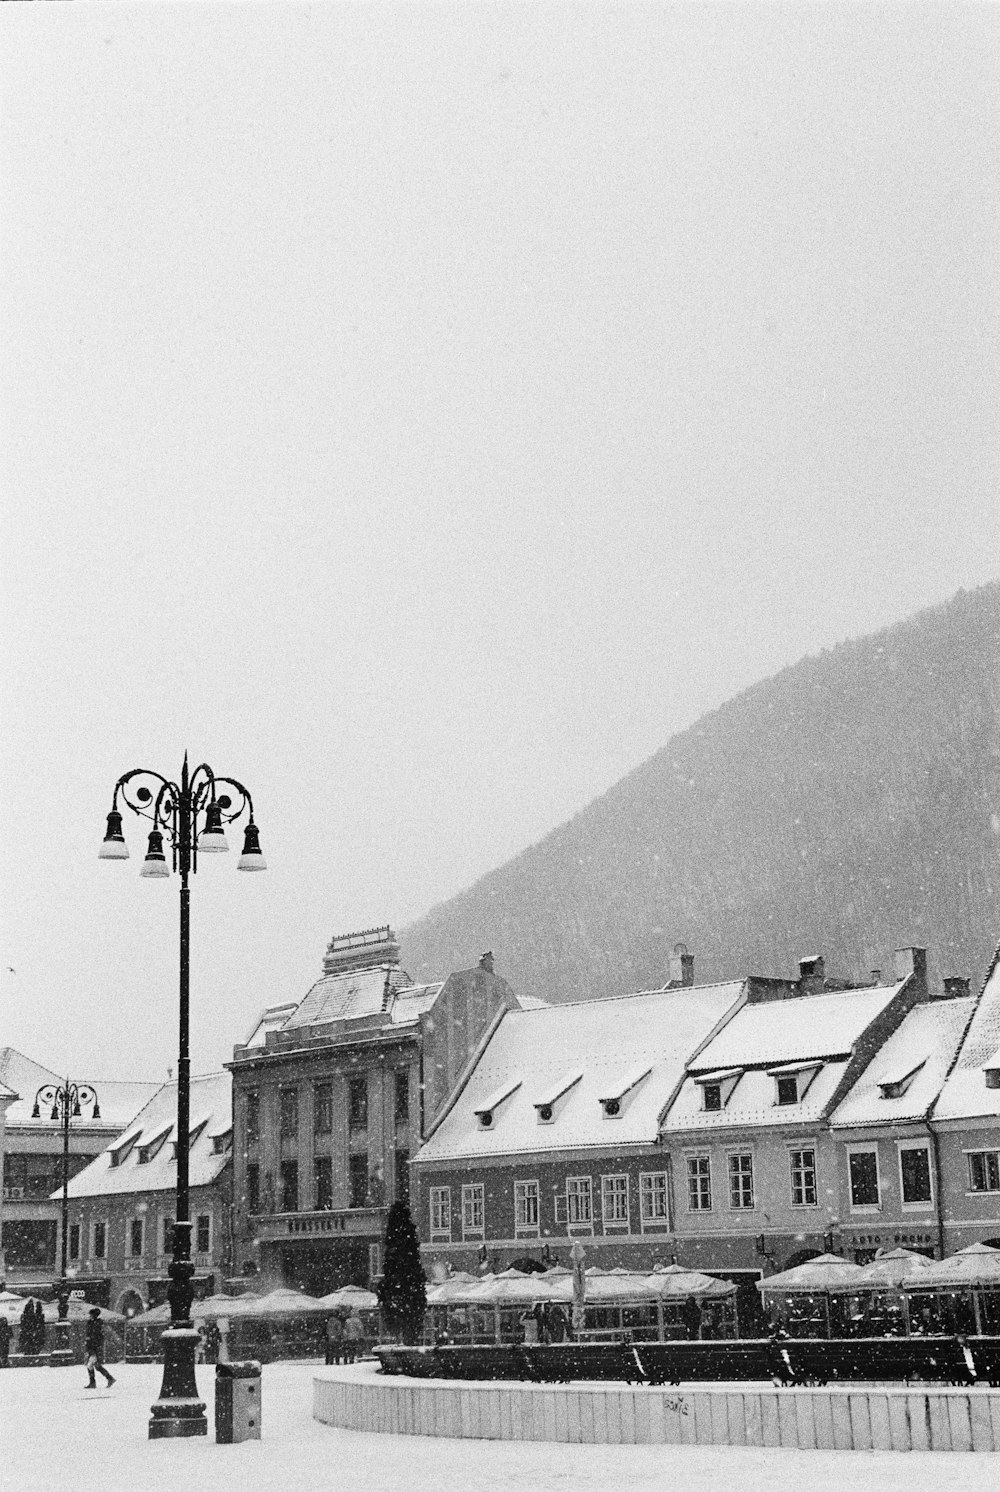 a black and white photo of a town in the snow